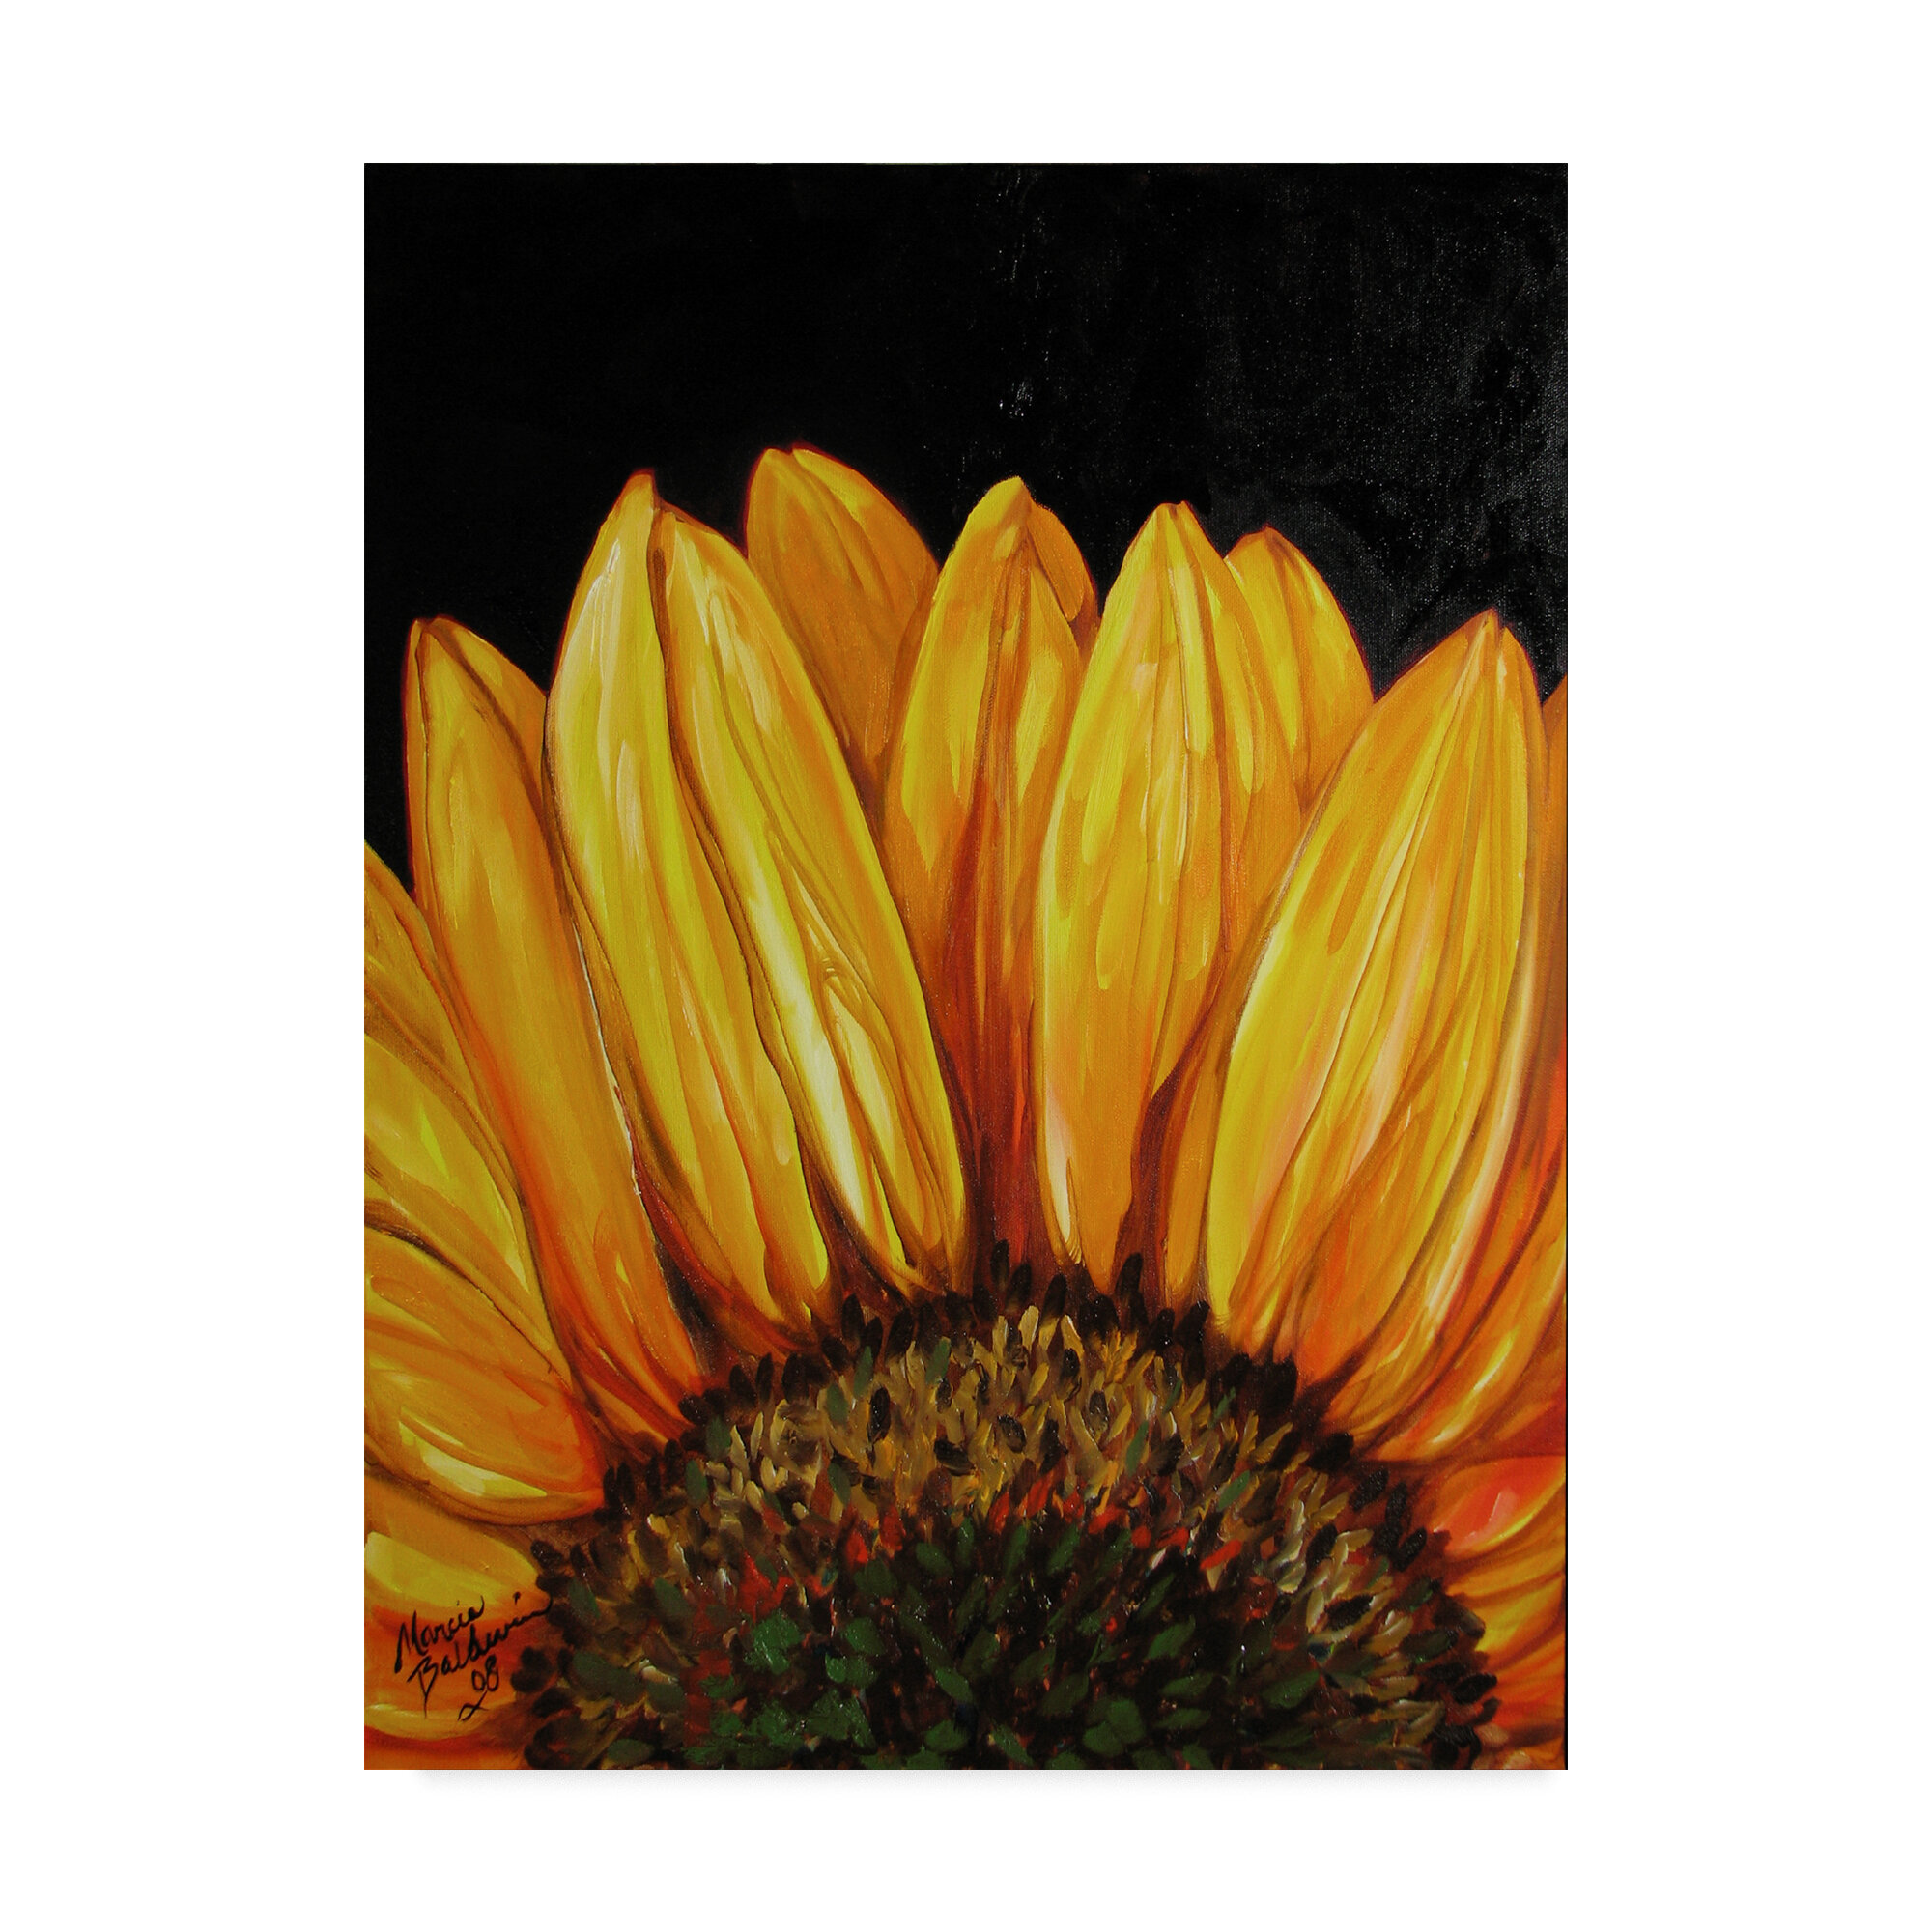 Trademark Art Sunflower Acrylic Painting Print On Wrapped Canvas